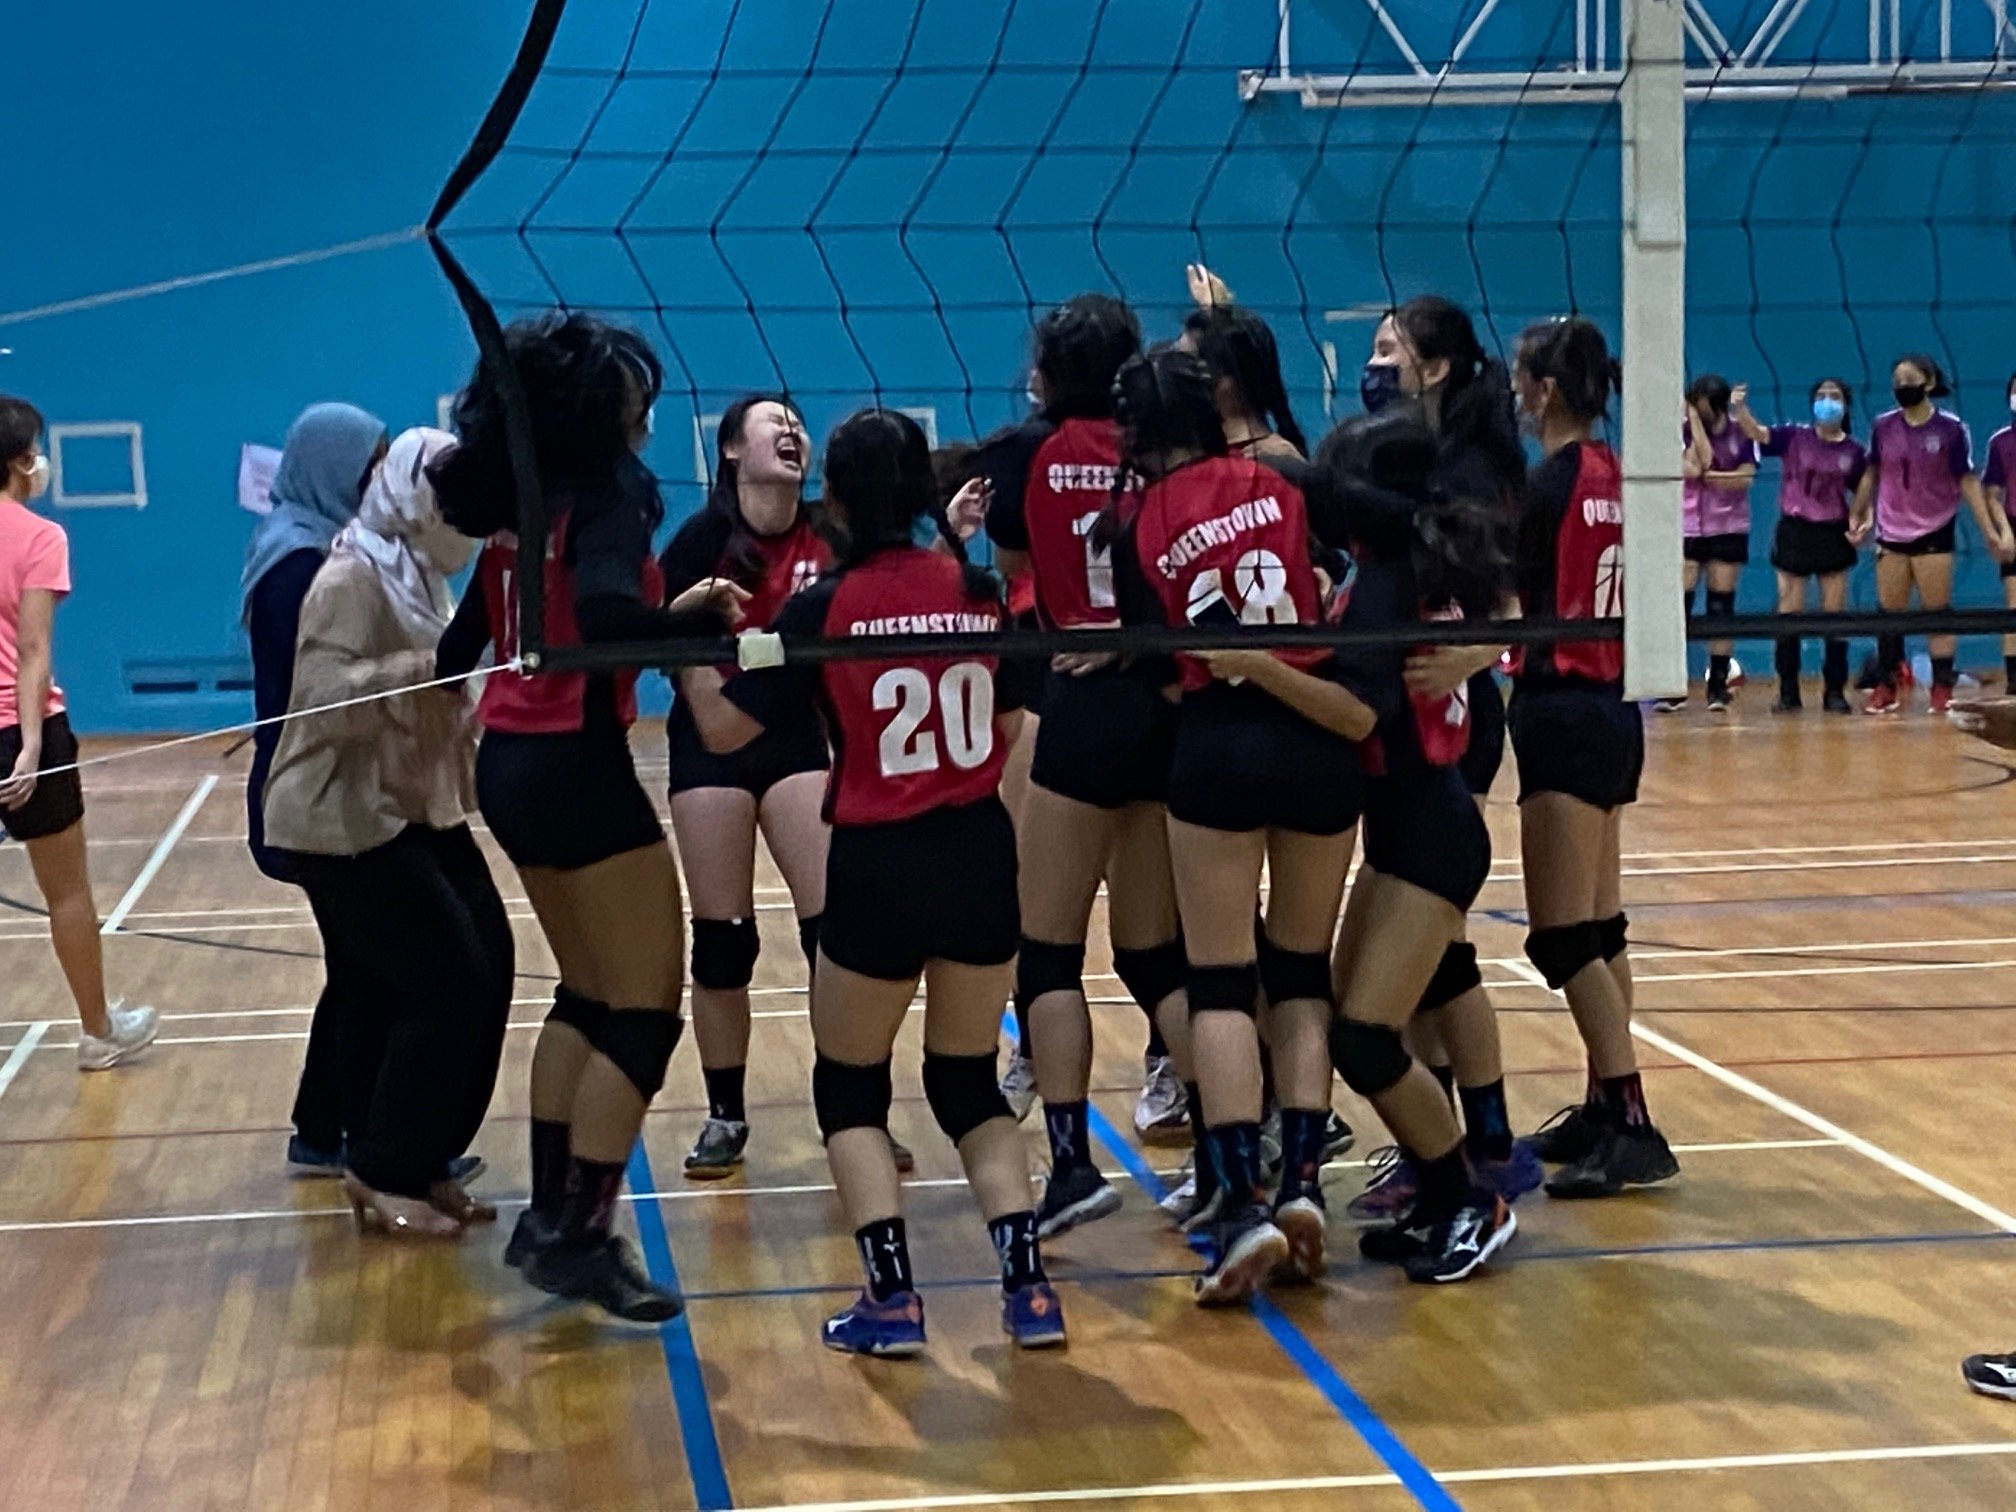 NSG South Zone B Div girls volleyball final - Queenstown (red) v Queensway (purple) 4-1